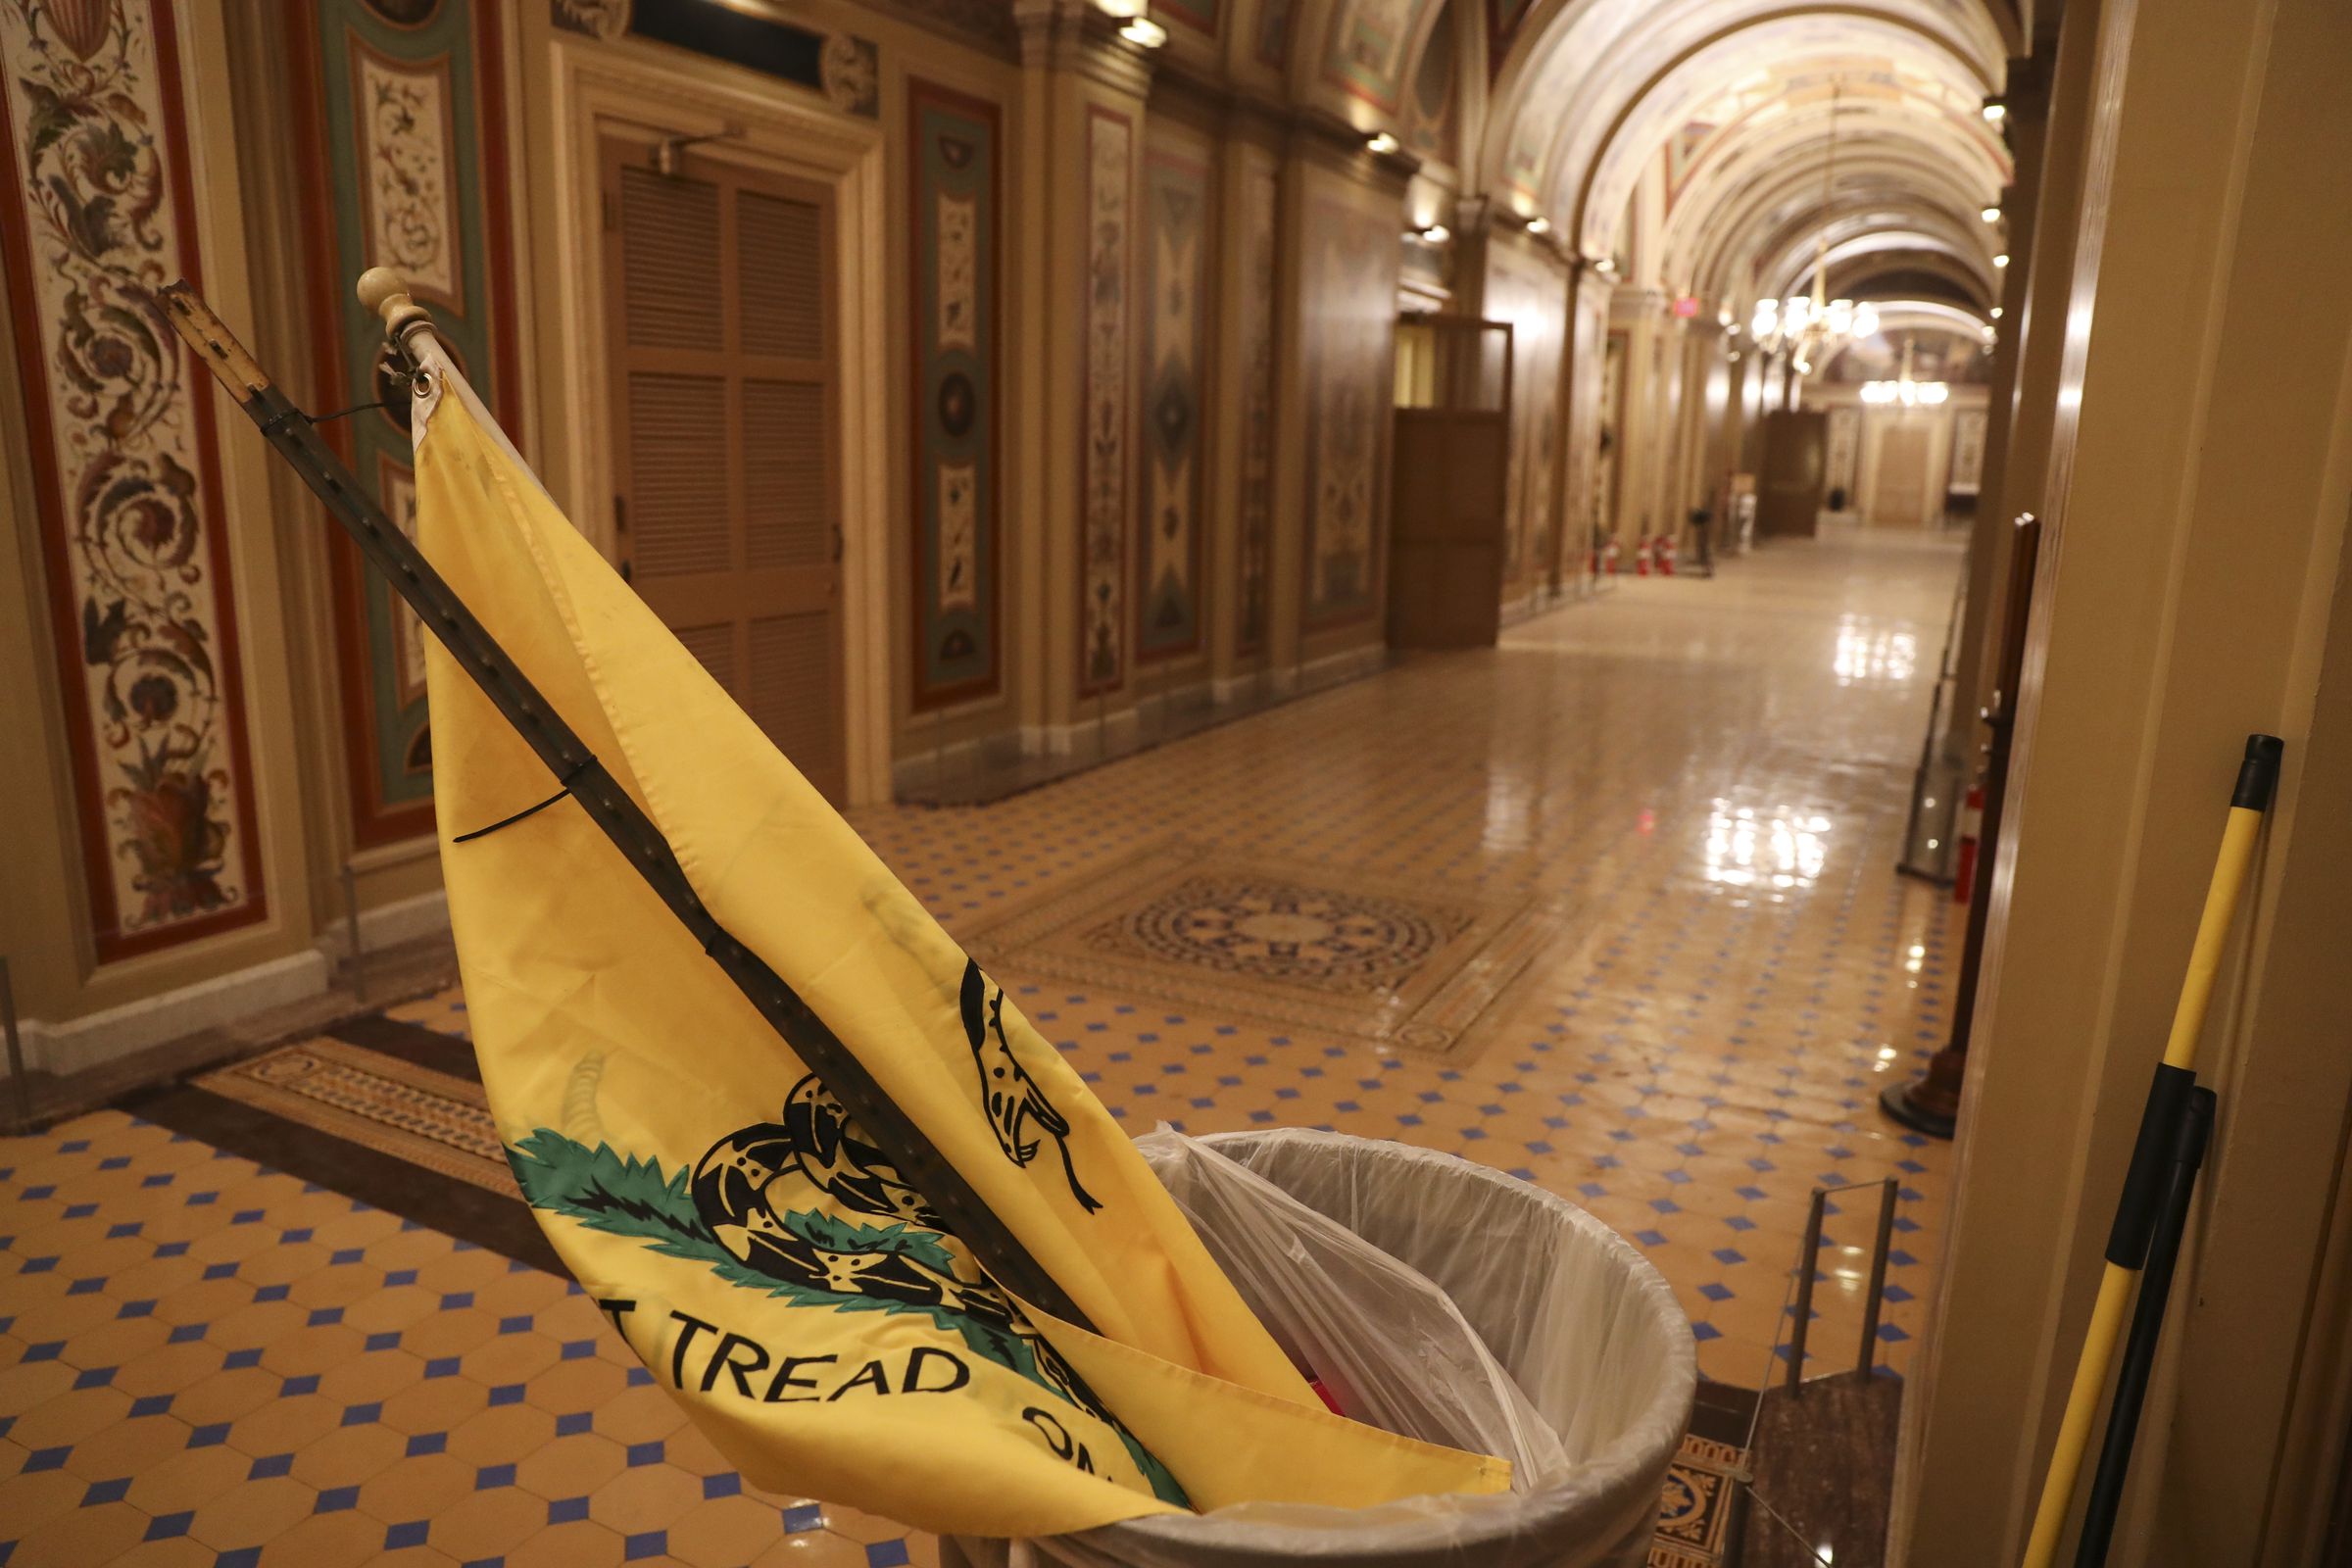 A Gadsden Flag flag left by Pro-Trump protesters who entered the U.S. Capitol building is seen after mass demonstrations in the nations capital during a joint session Congress to ratify President-elect Joe Biden on January 06, 2021 in Washington, DC.